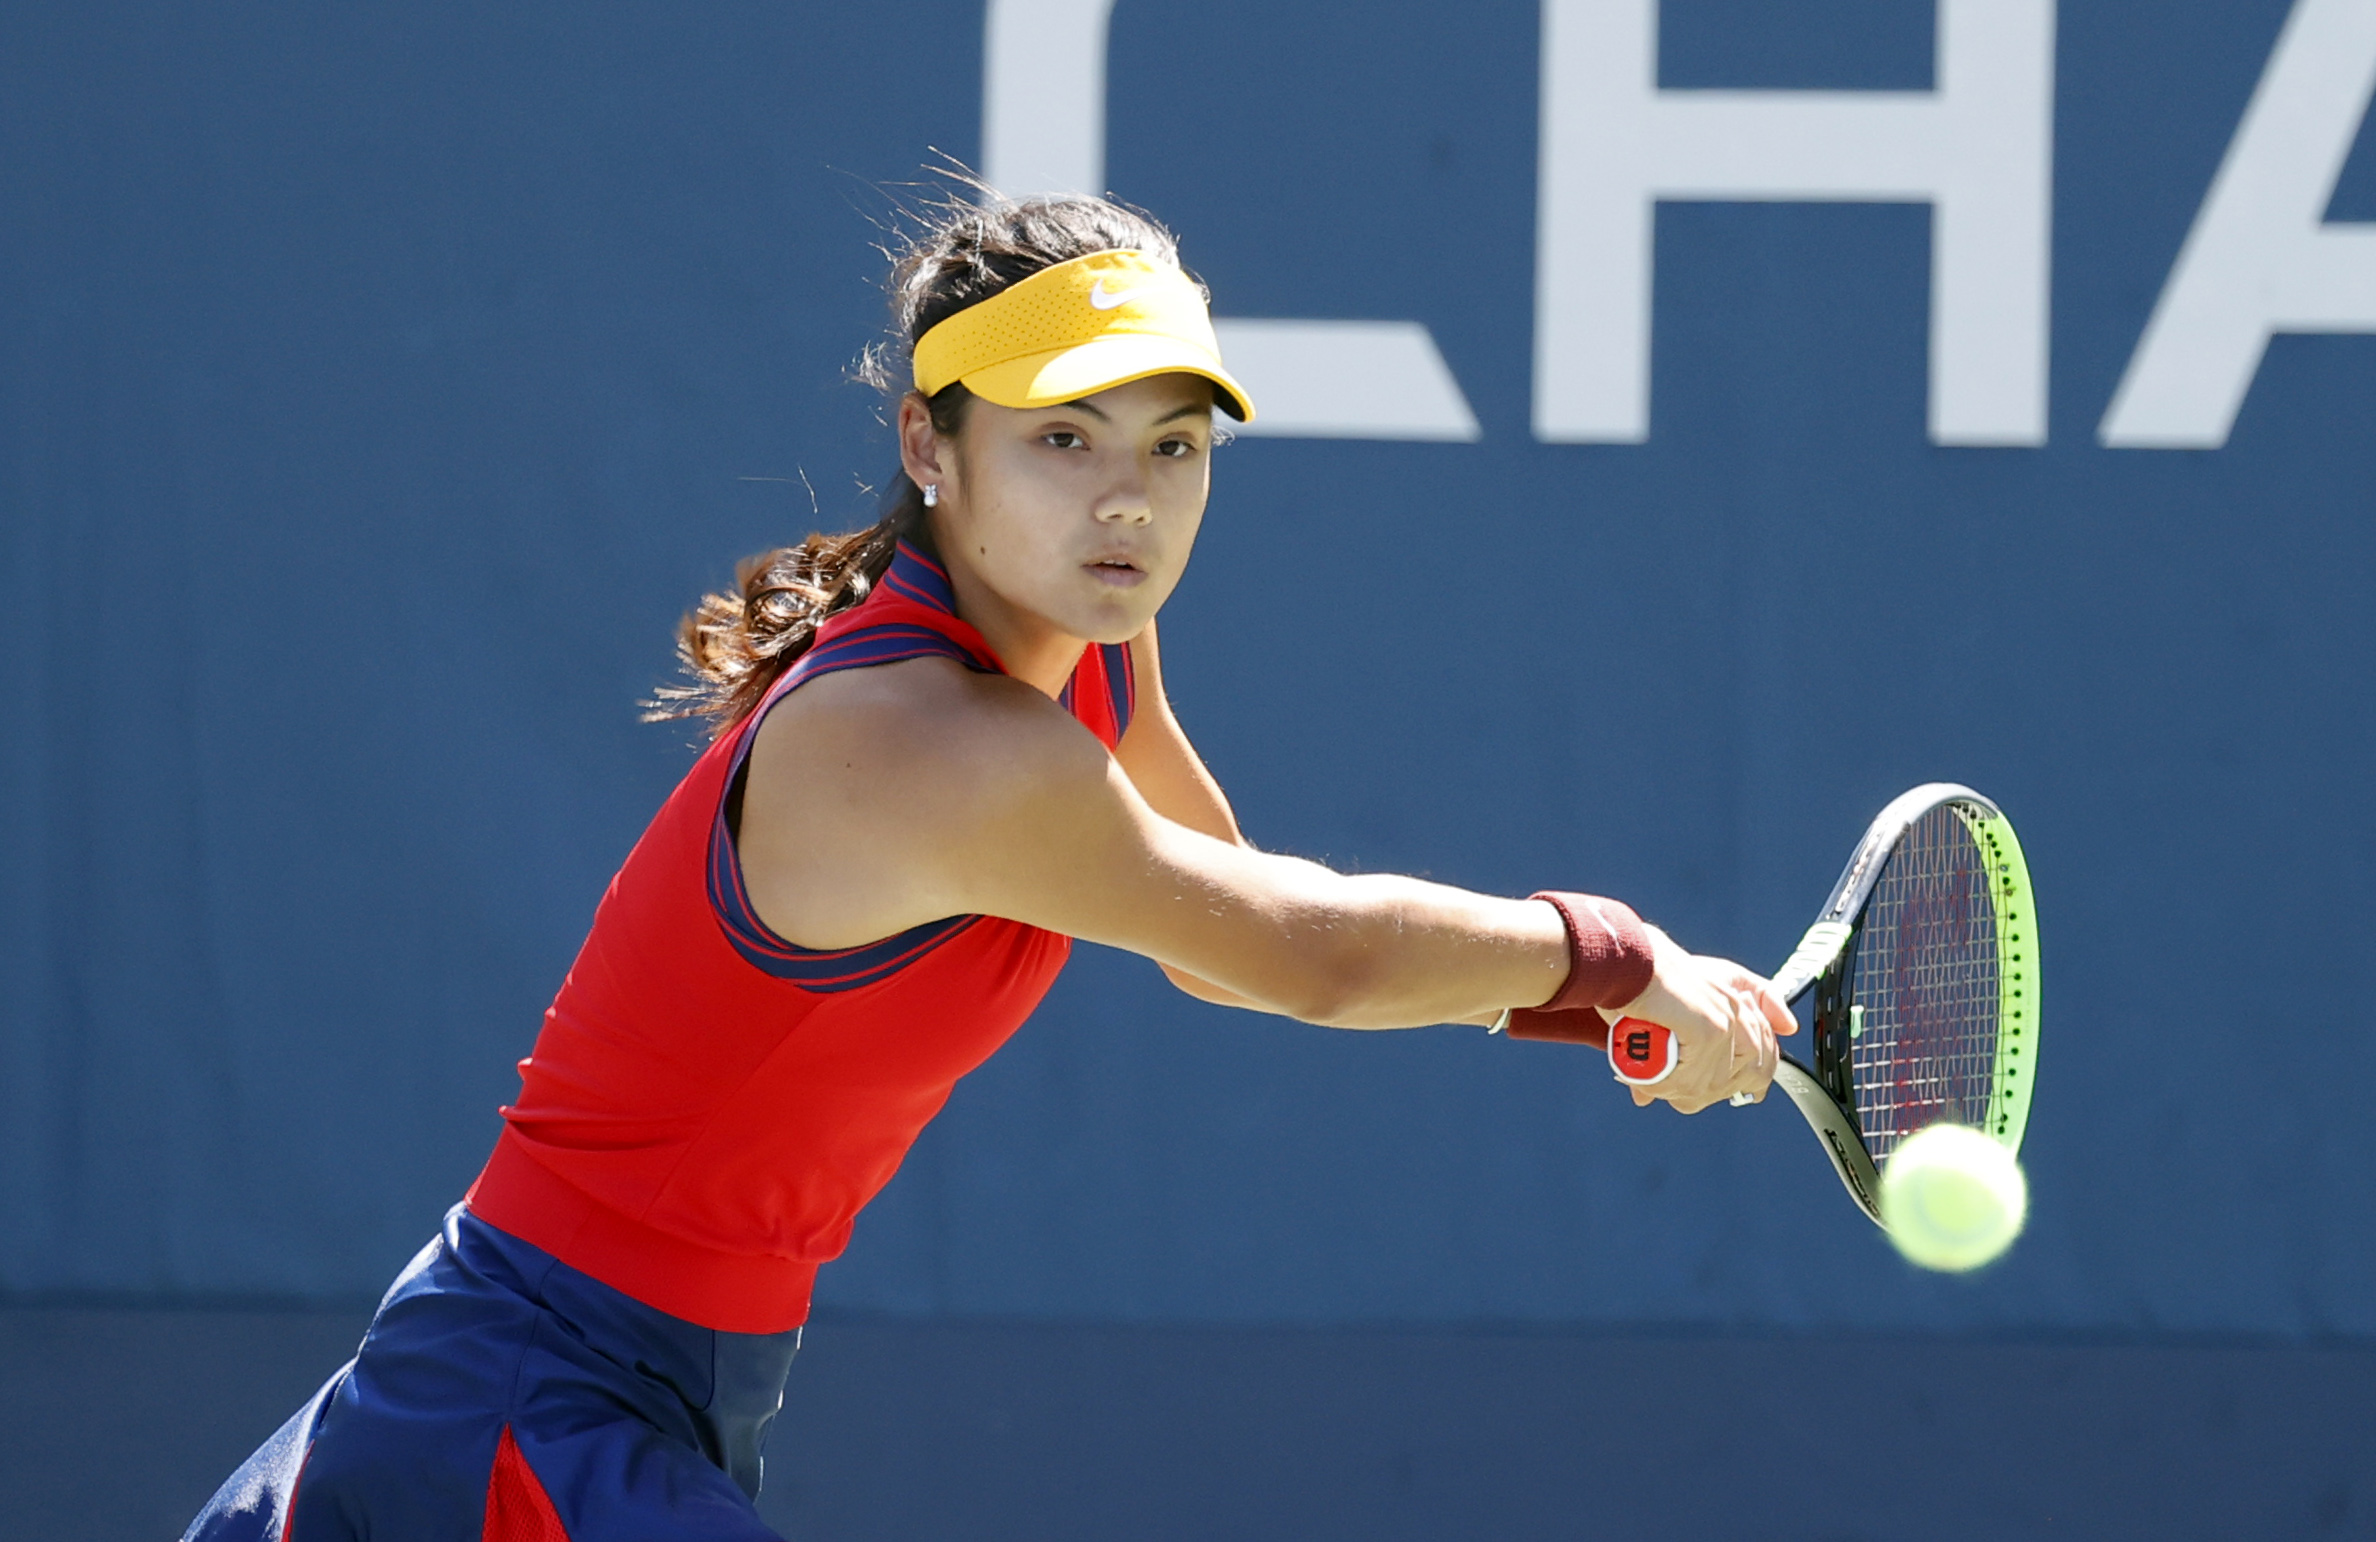 Sep 2, 2021; Flushing, NY, USA; Emma Raducanu of Great Britain hits a shot against Shuai Zhang of China in a second round match on day four of the 2021 U.S. Open tennis tournament at USTA Billie Jean King National Tennis Center. Mandatory Credit: Jerry Lai-USA TODAY Sports